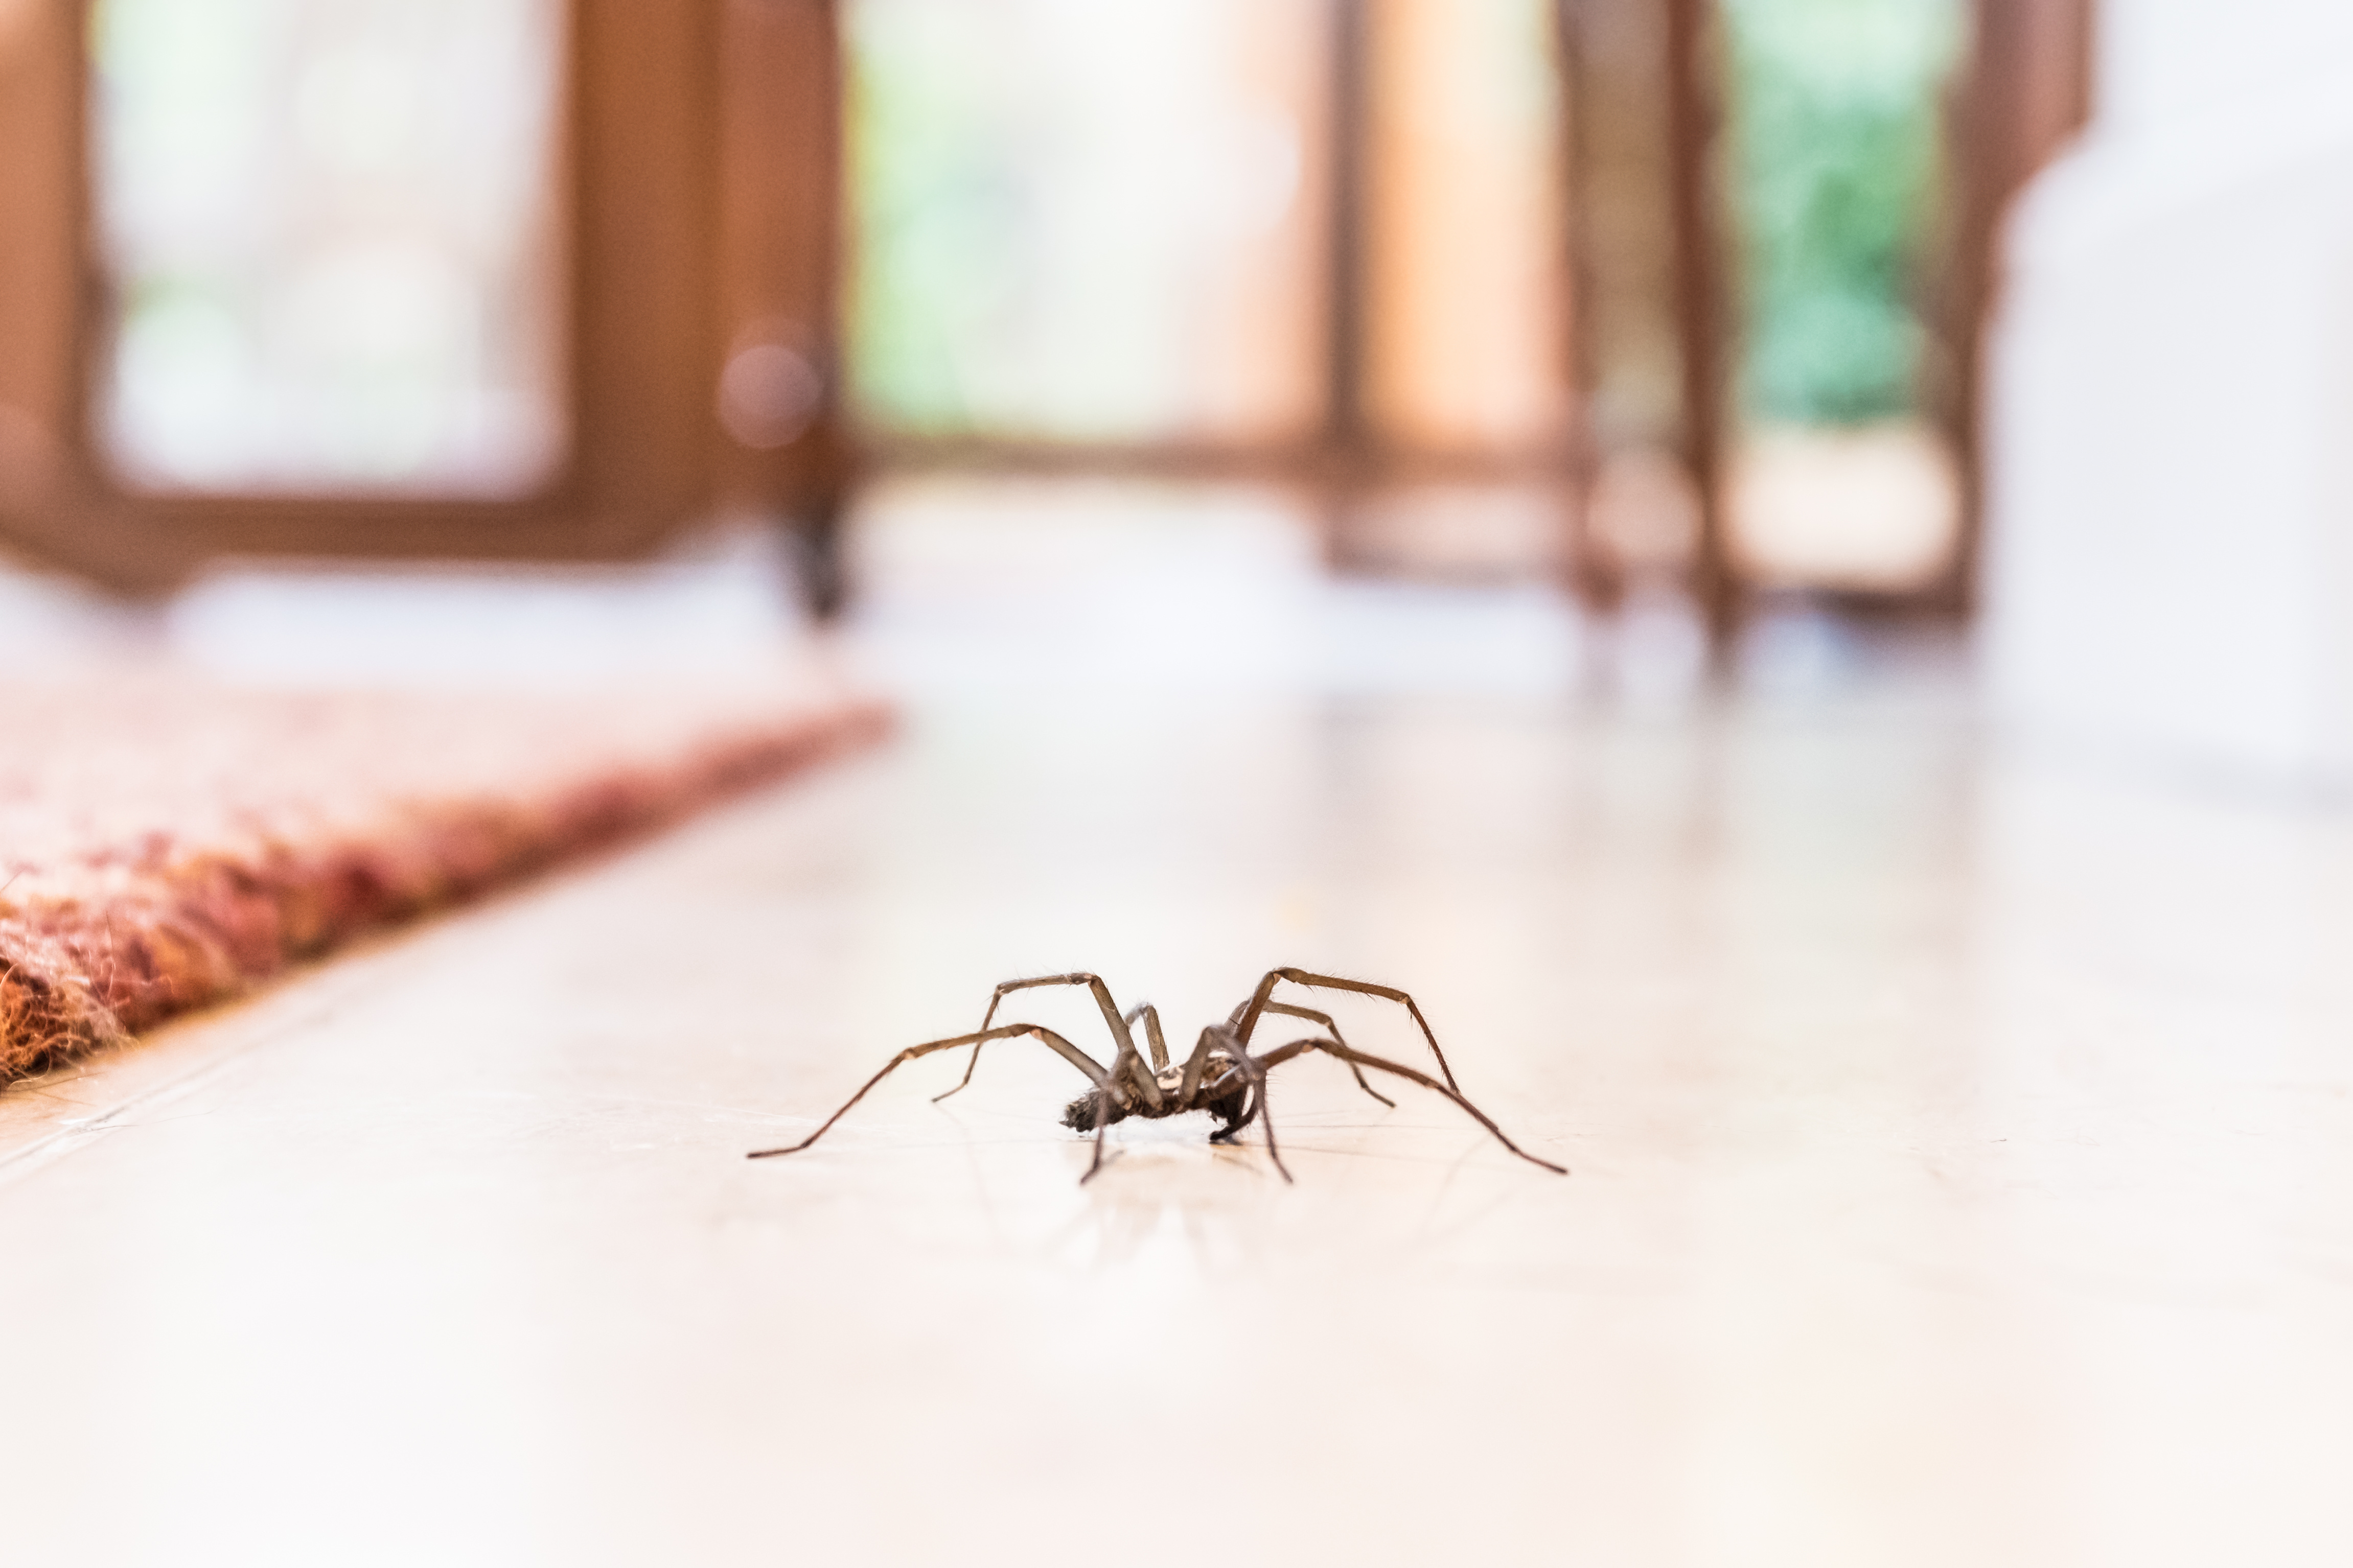 A spider scuttling across a hardwood floor - contact GGA Pest Management today for professional spider removal.